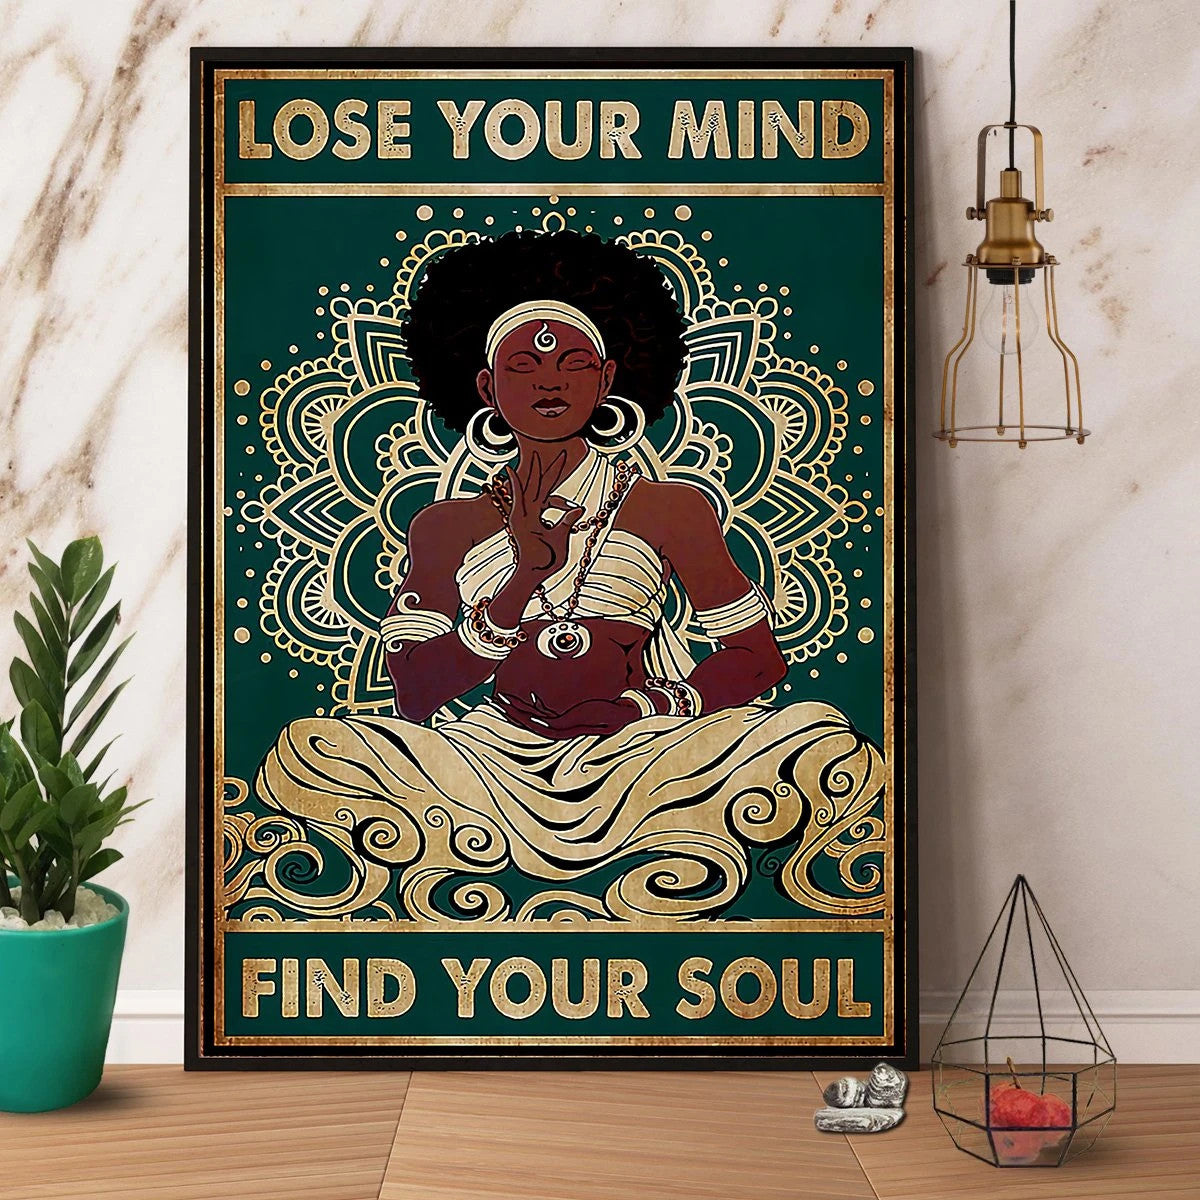 Black Girl Doing Yoga Lose Your Mind Paper Canvas Prints Poster Wall Art